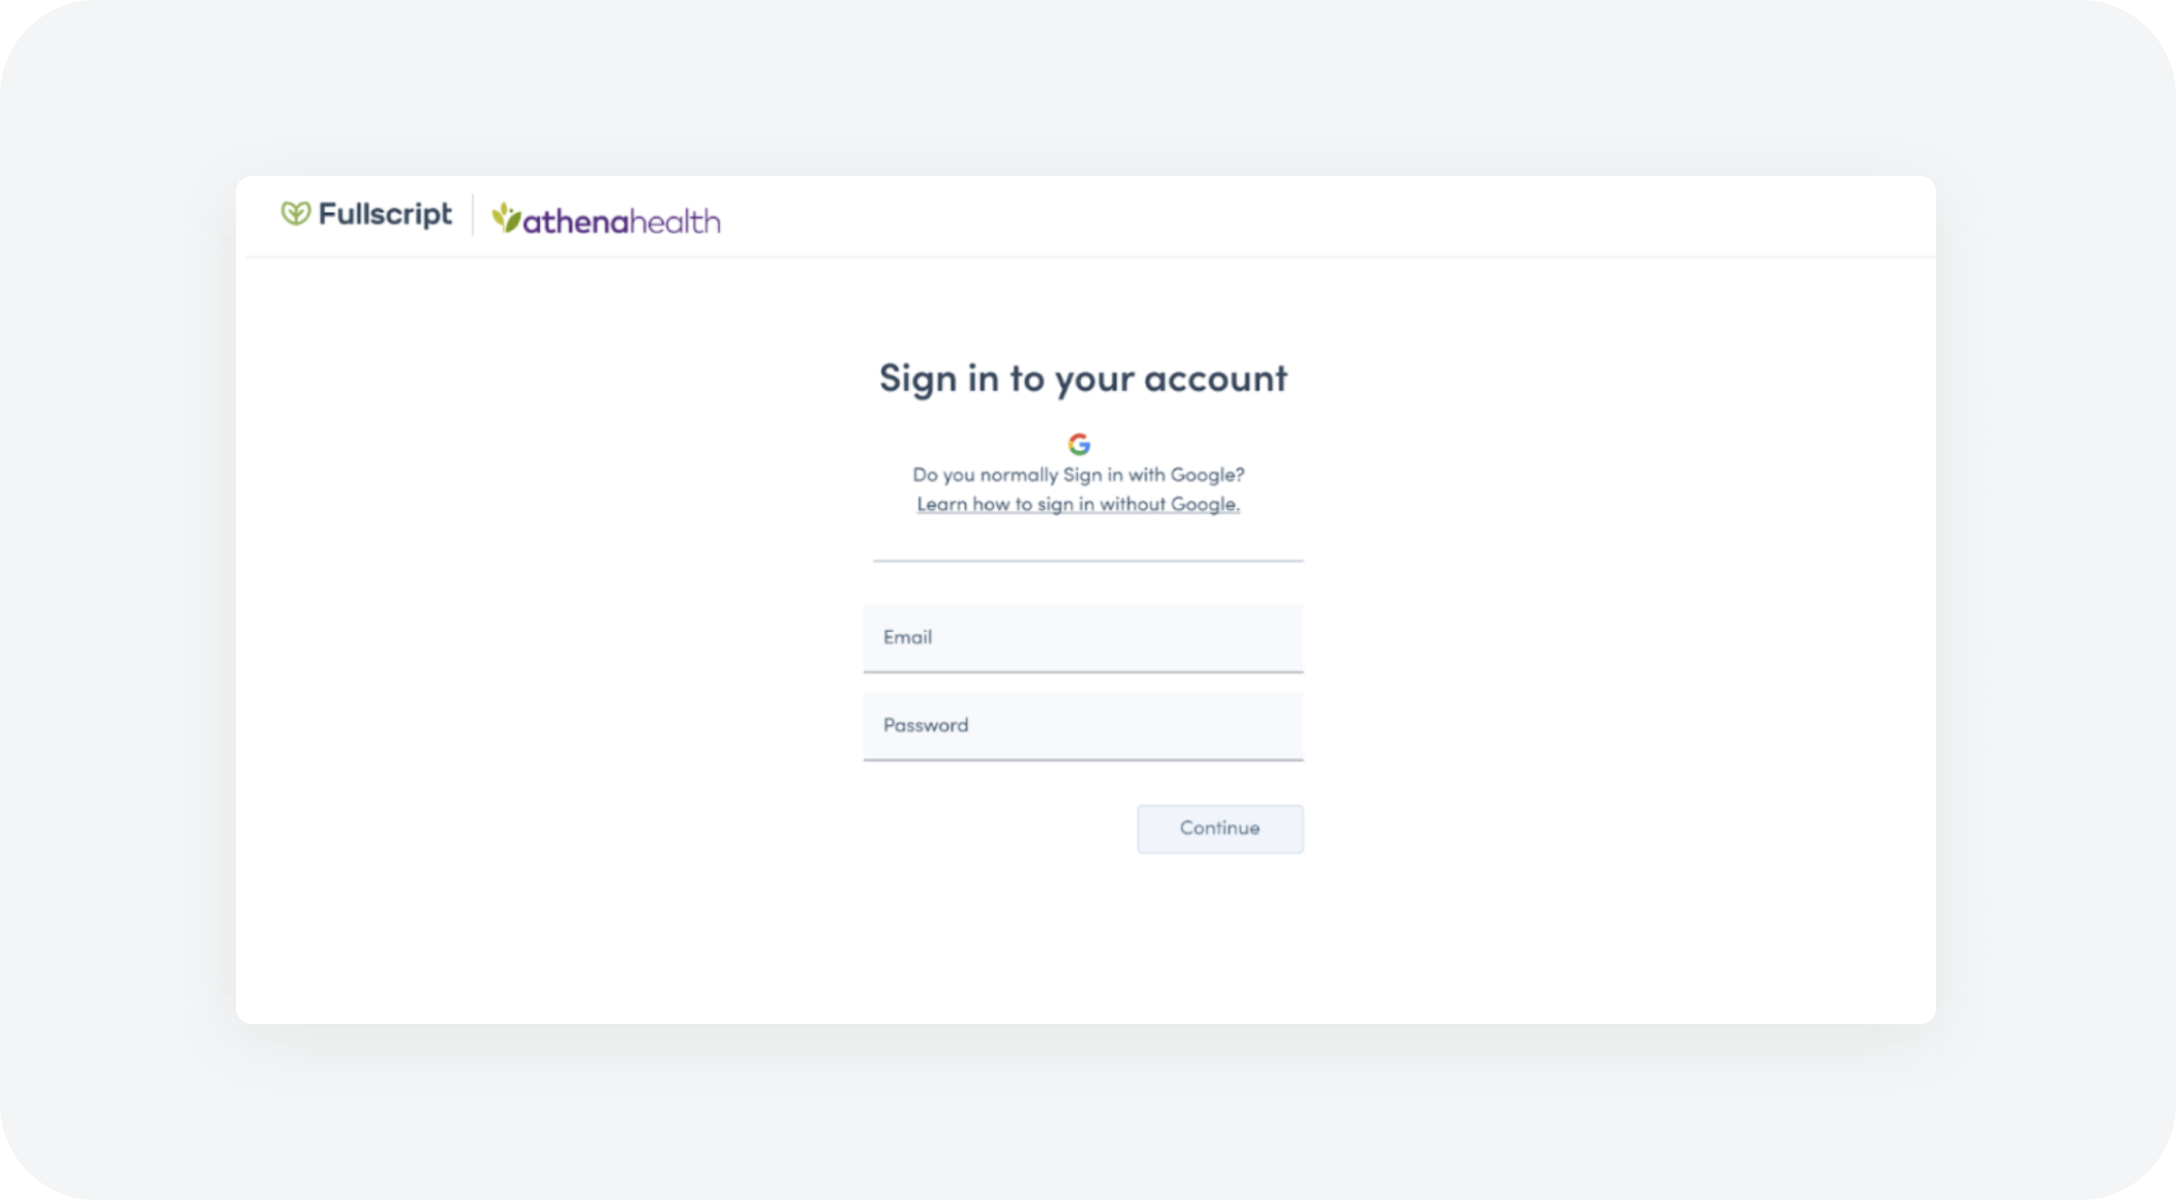 athenahealth integration step 4 image showing how to sign in to your Fullscript account